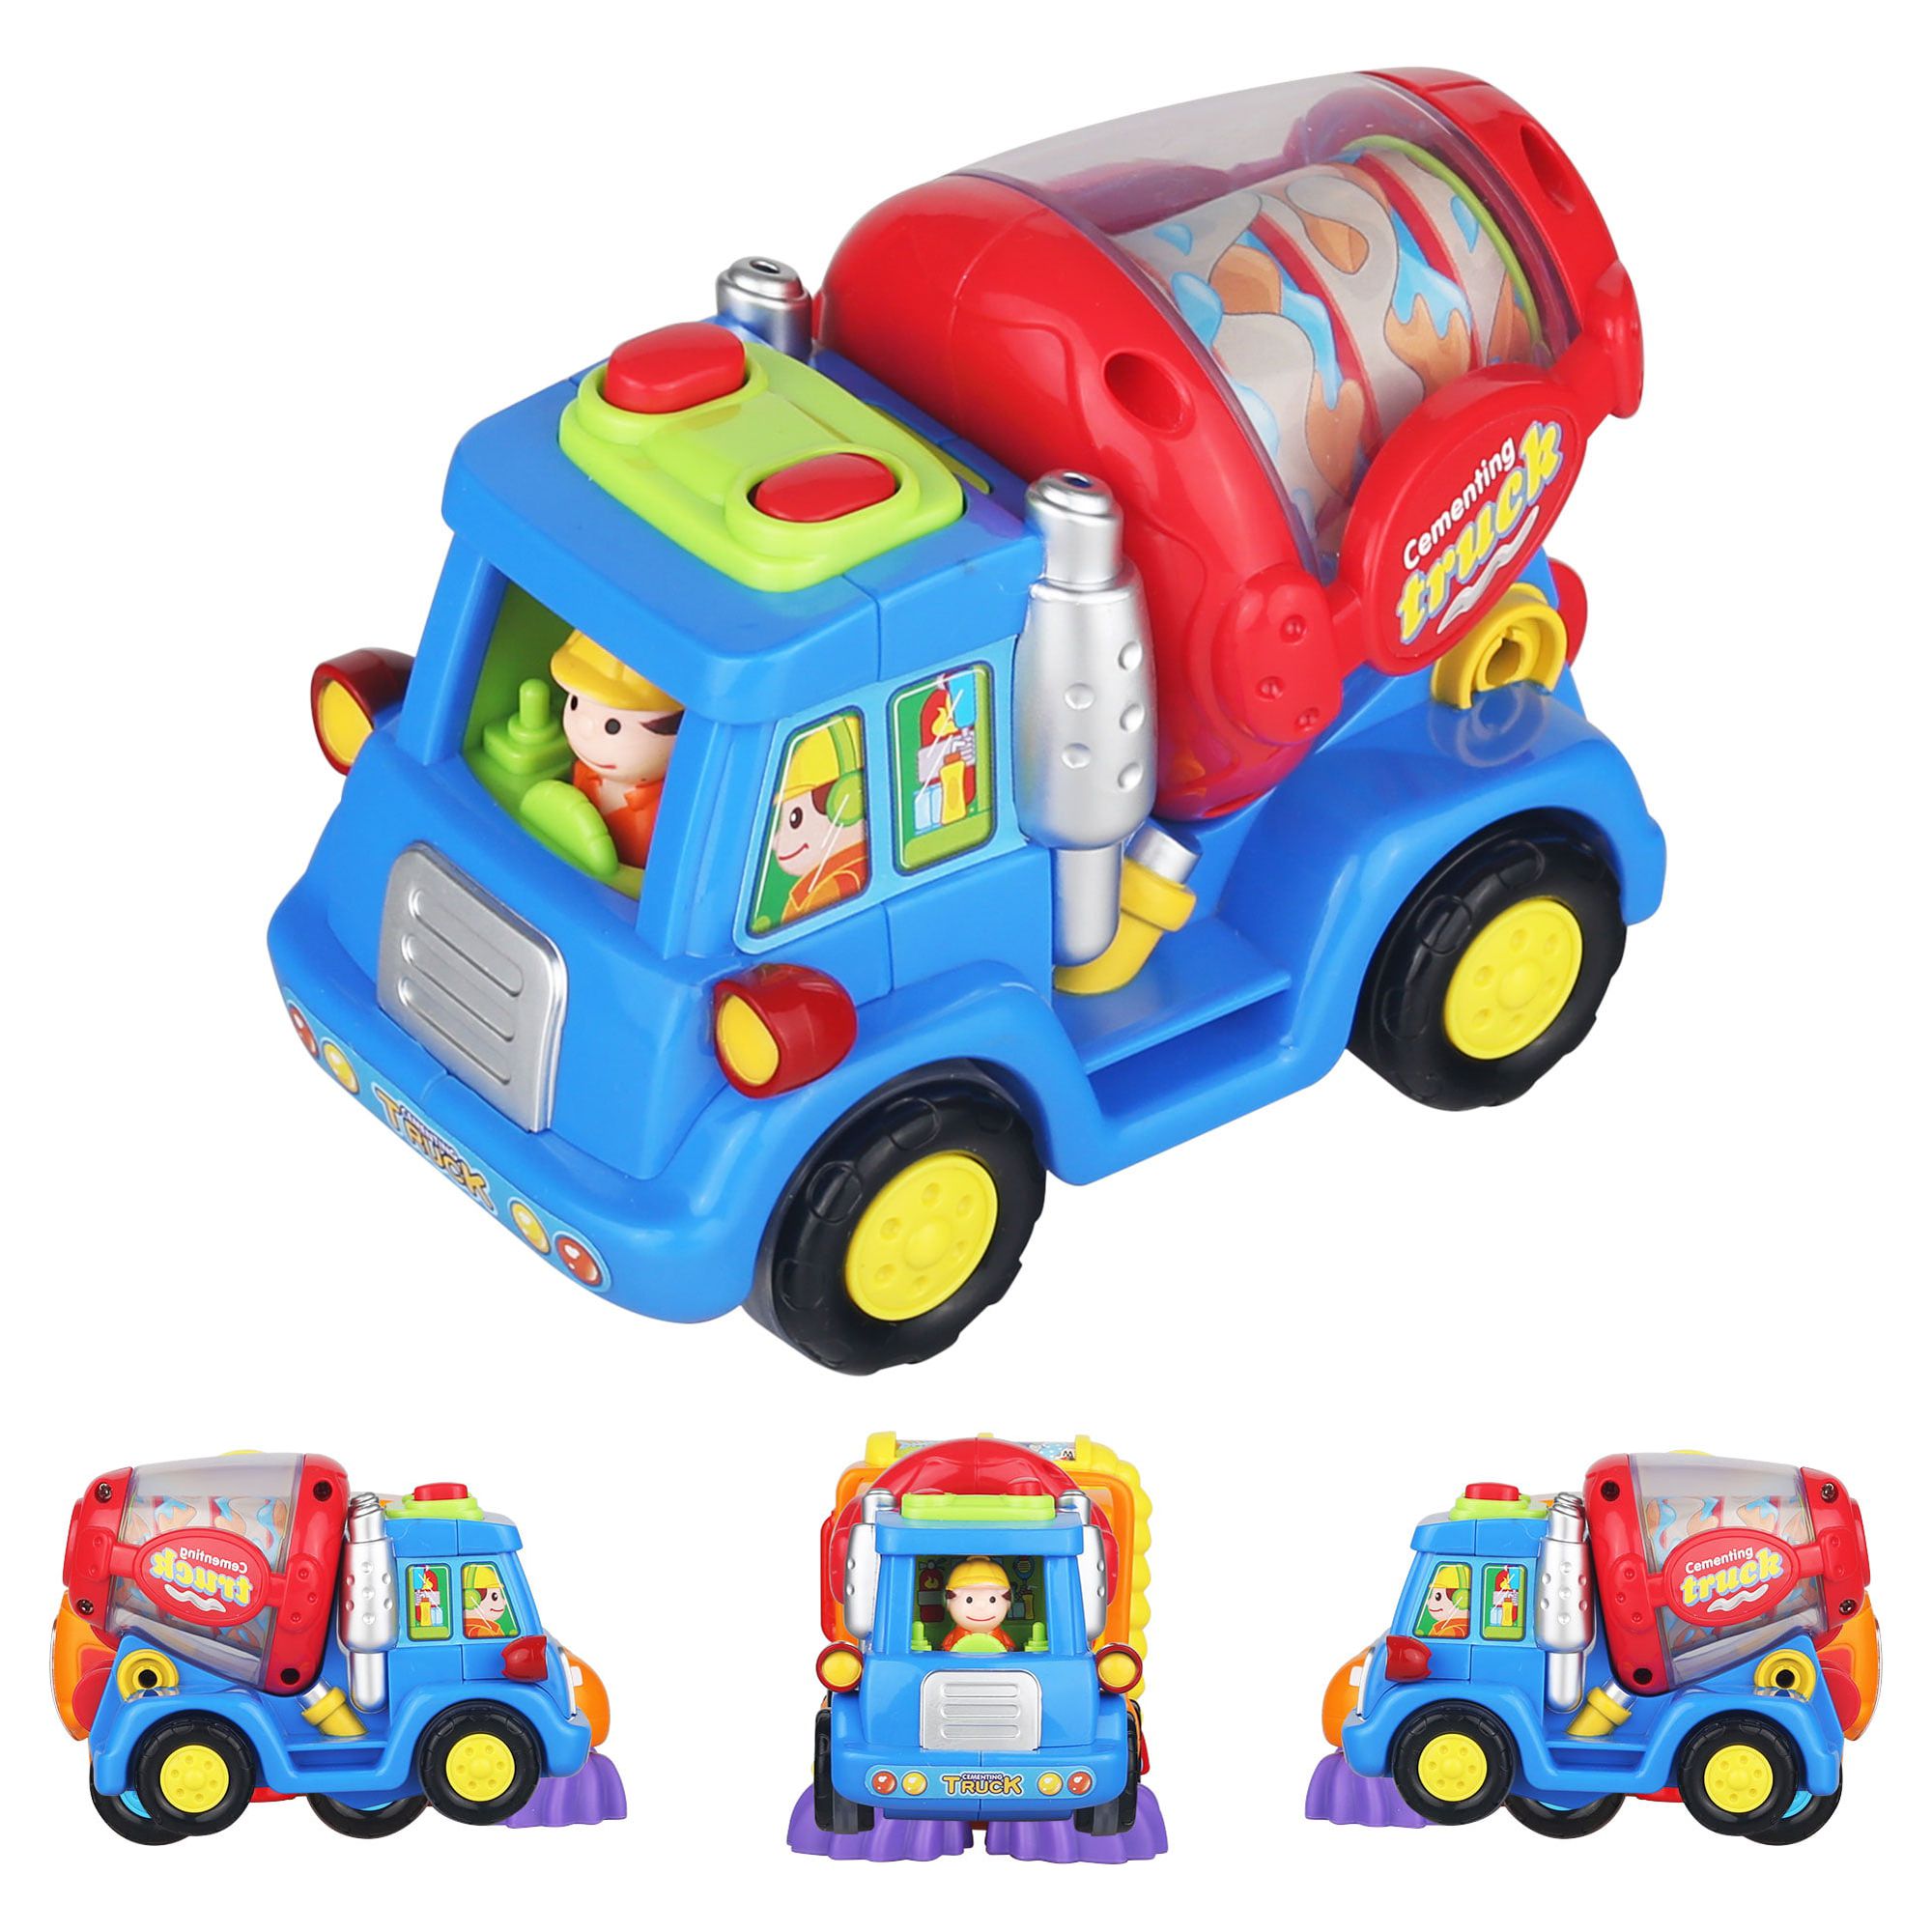 CifToys Friction Powered Push and Go Toddler Construction Toys Truck Vehicle Playset, Toys for 1 2 3 Year Old Boy Toys Gifts (3 Pieces) - image 5 of 10